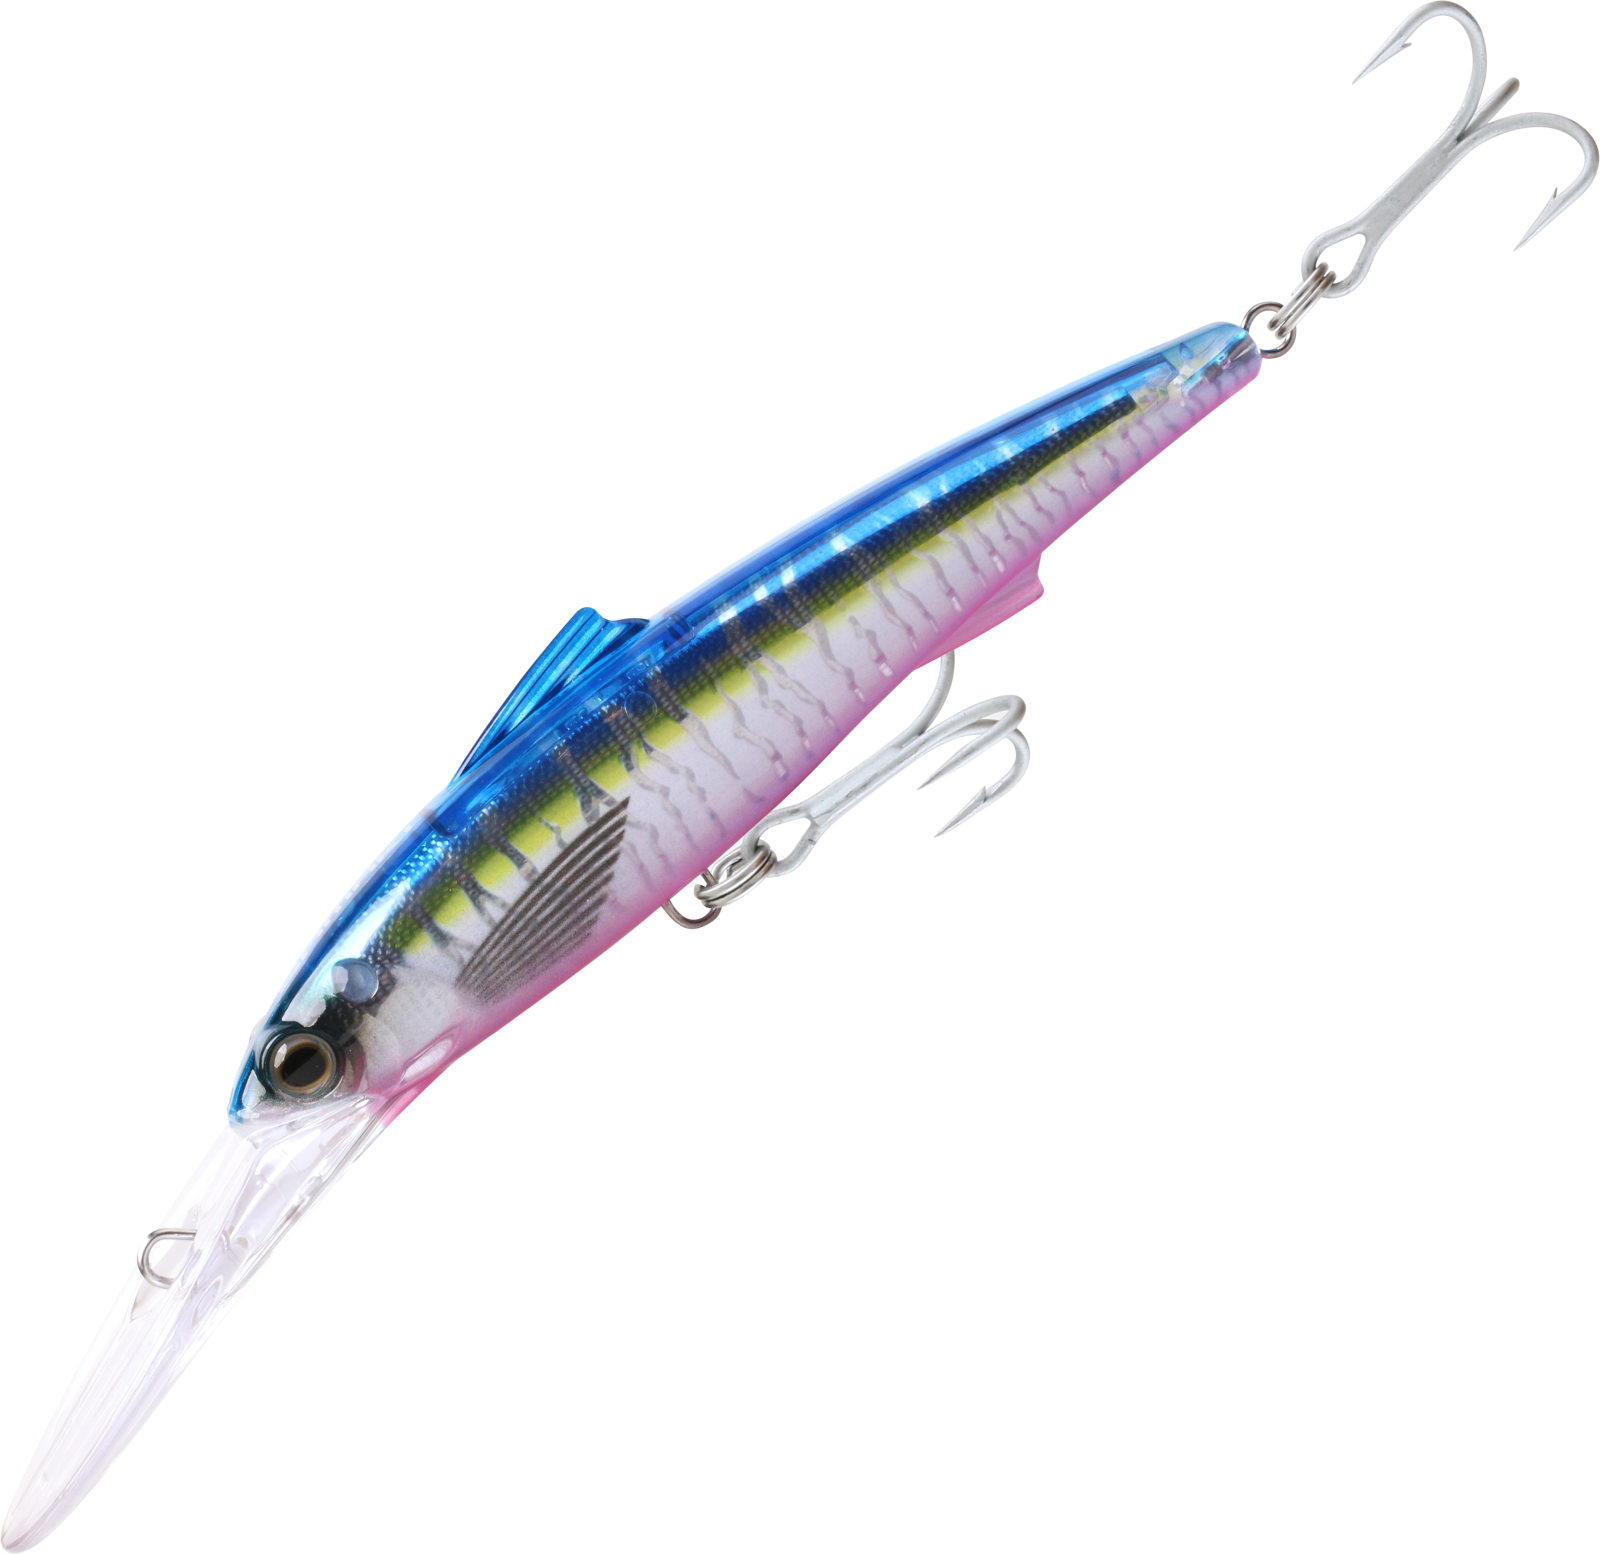 Anglers Warehouse Tweed Heads - Duo D-squid are back!!! Available